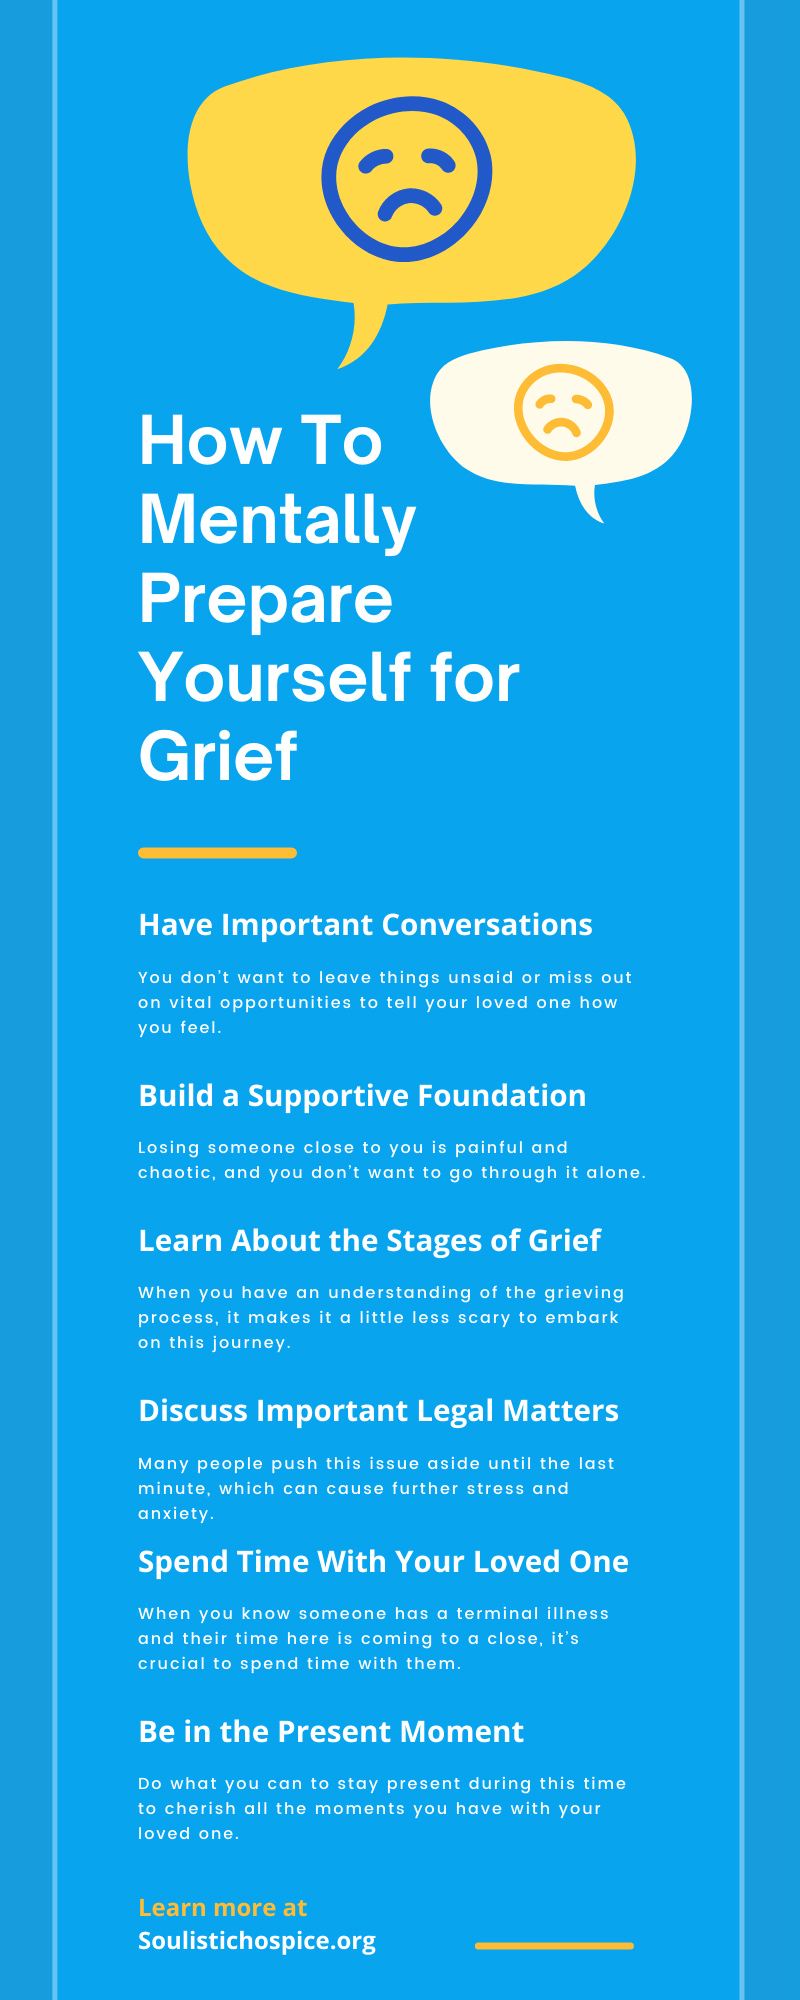 How To Mentally Prepare Yourself for Grief